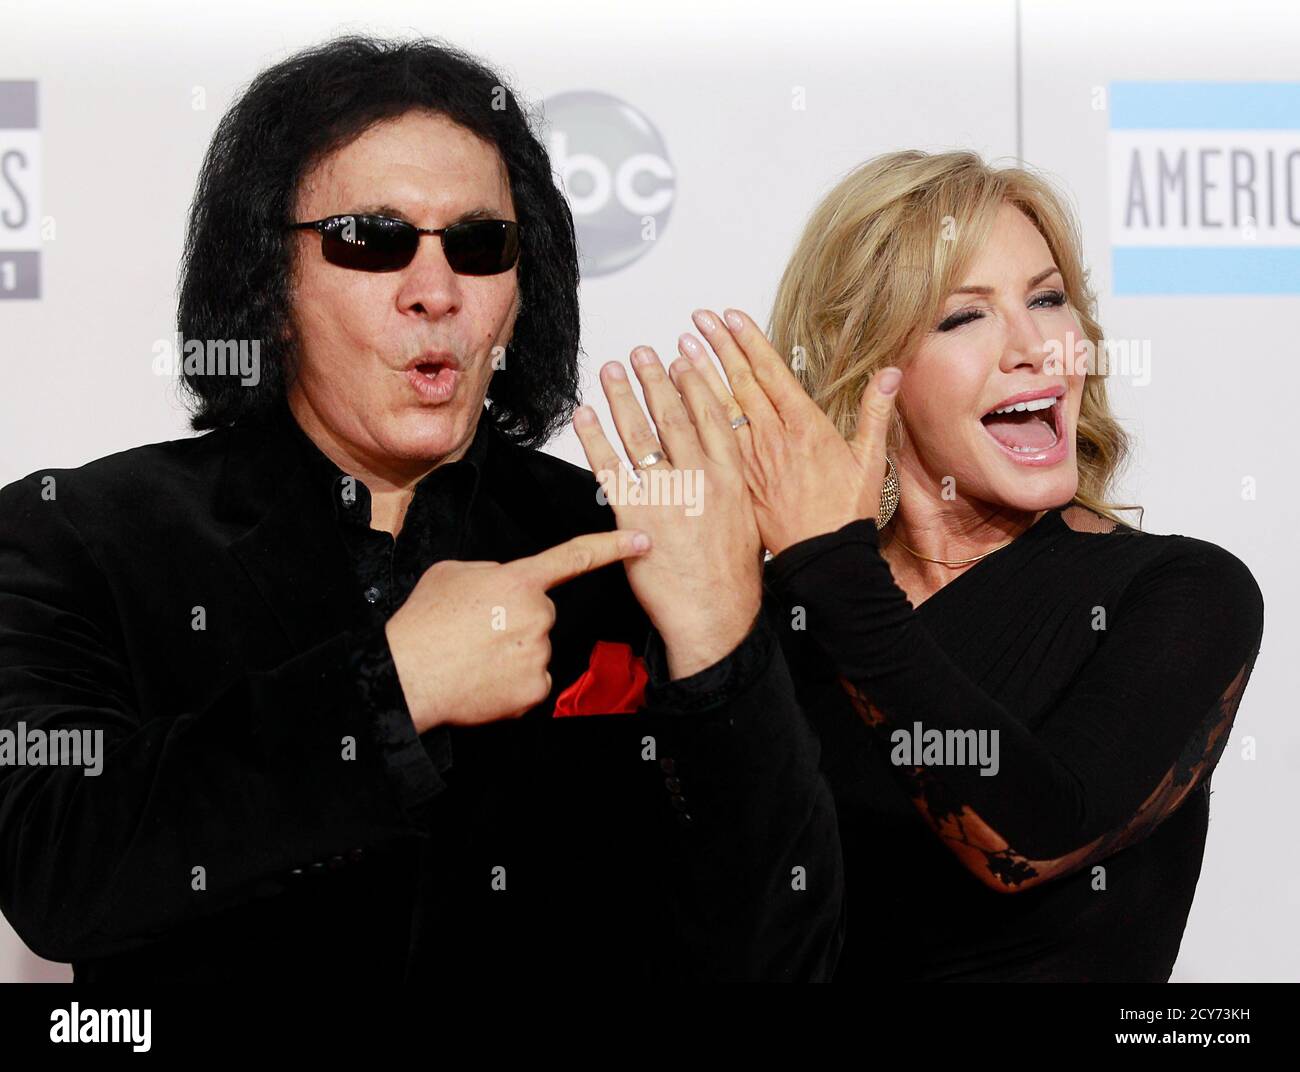 Gene Simmons Wife Shannon Tweed High Resolution Stock Photography and ... photo